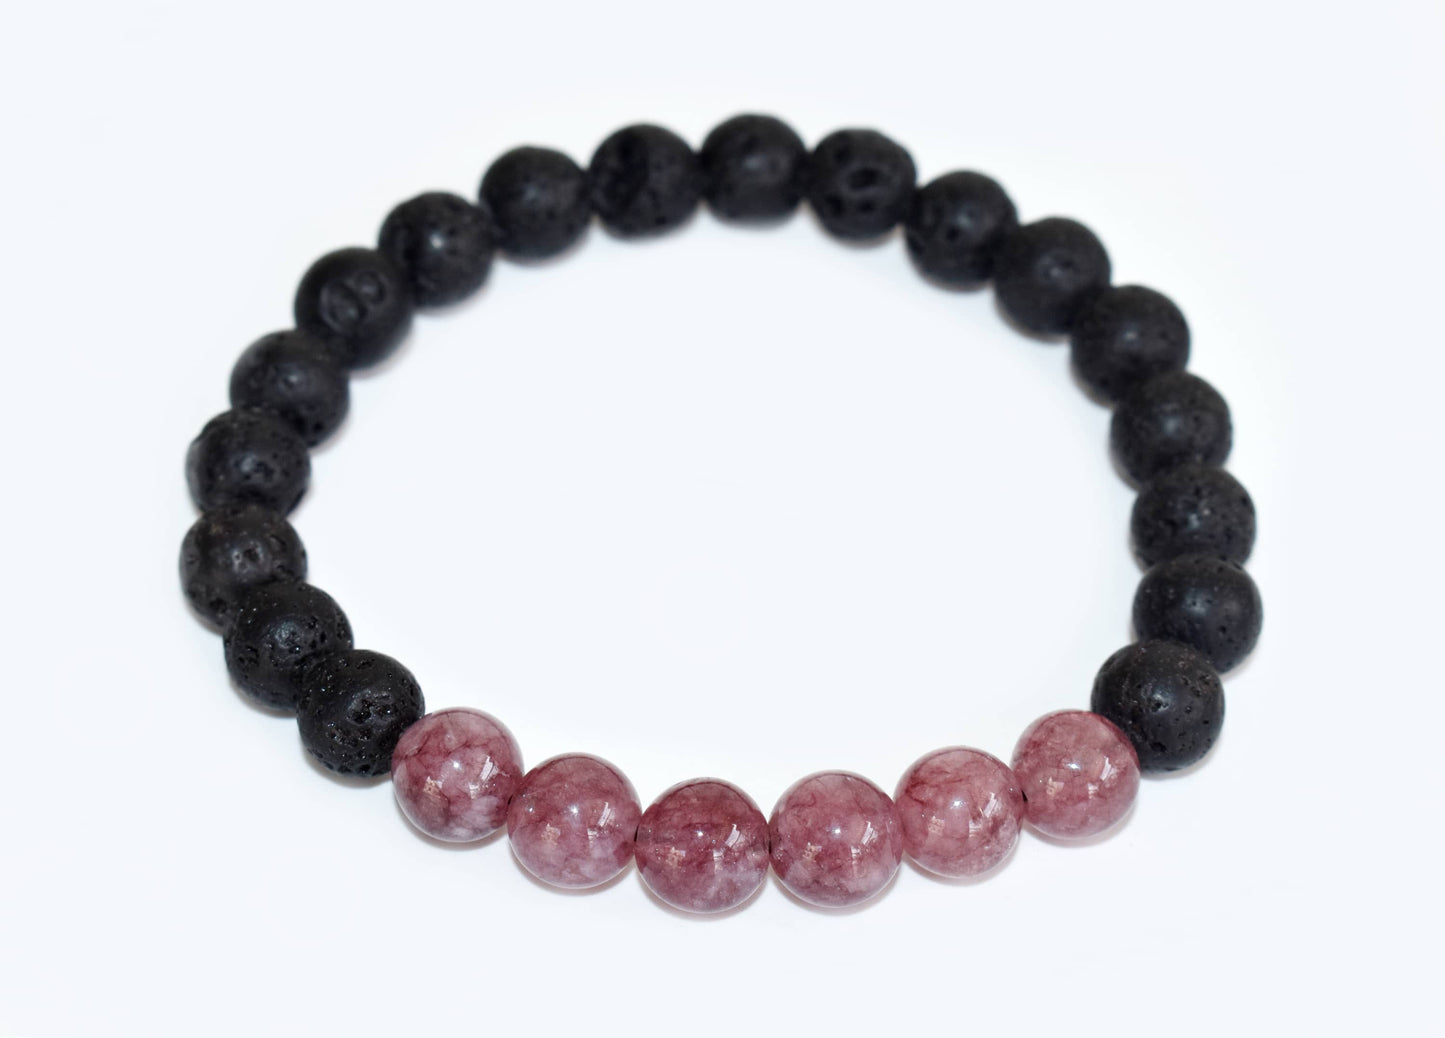 Lava Diffuser Bracelet, Lava with Pink Tourmaline Beads Diffuser Jewelry, Aromatherapy, Essential Oil Bracelet, Spiritual Gift, Yoga Gift for Her,